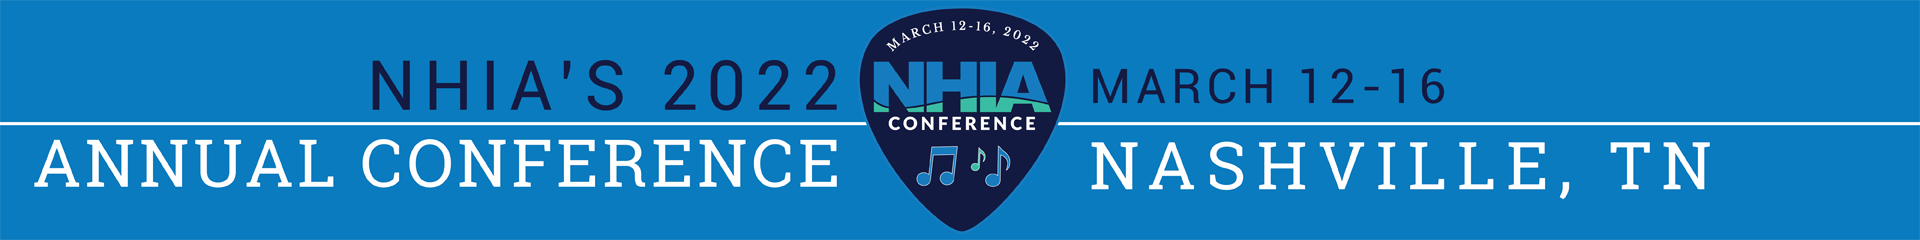 NHIA 2022 Event Event Banner